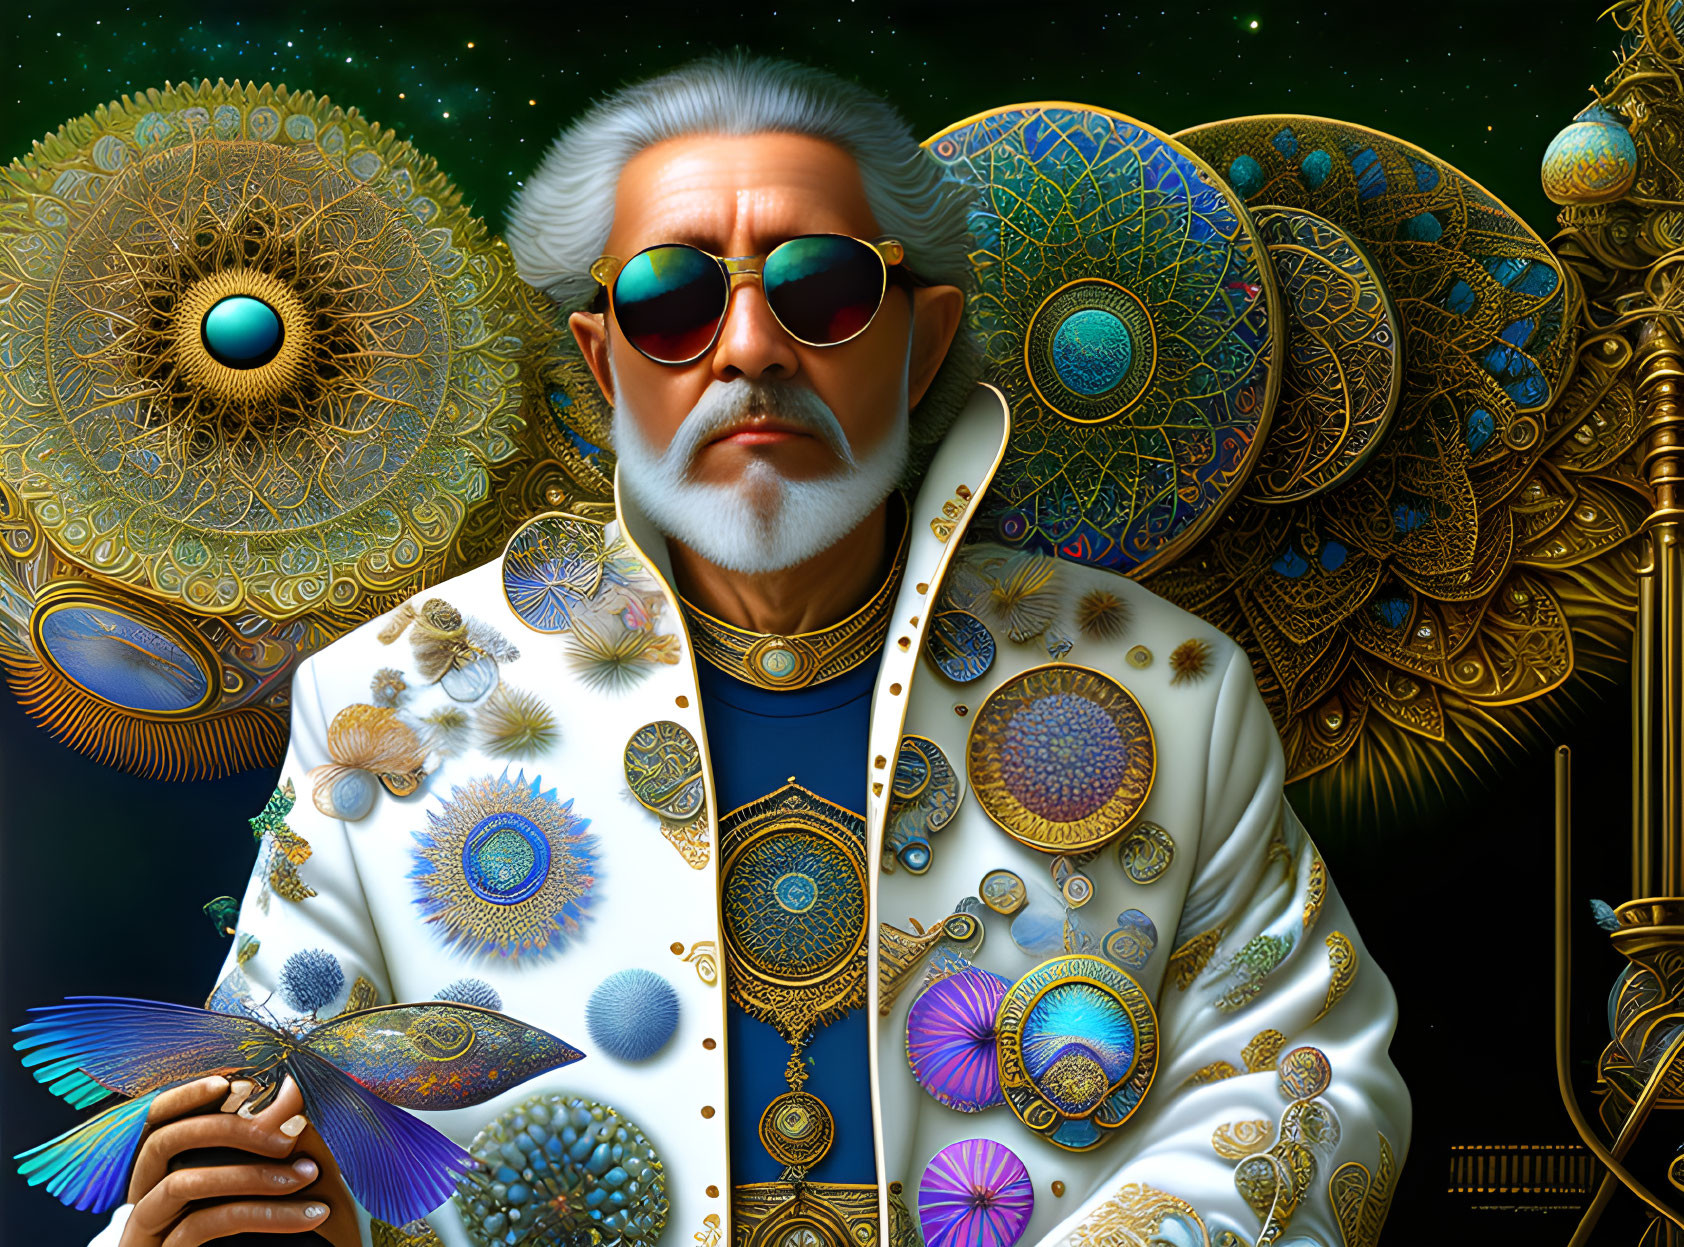 Elderly man with white beard and peacock feather in stylish attire